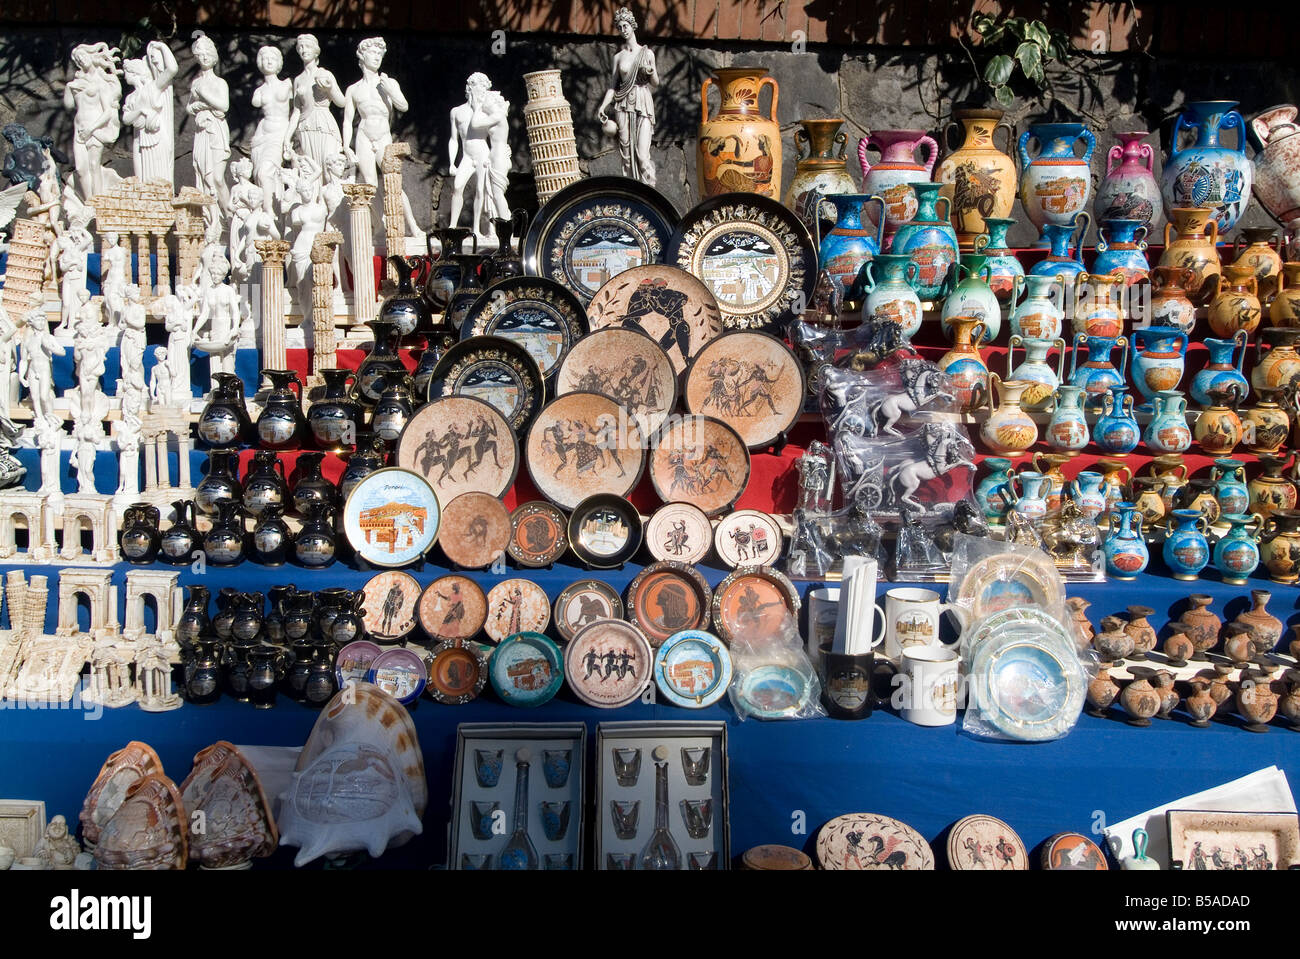 Crafts and reproductions for sale near Pompeii, near Naples, Campania, Italy, Europe Stock Photo